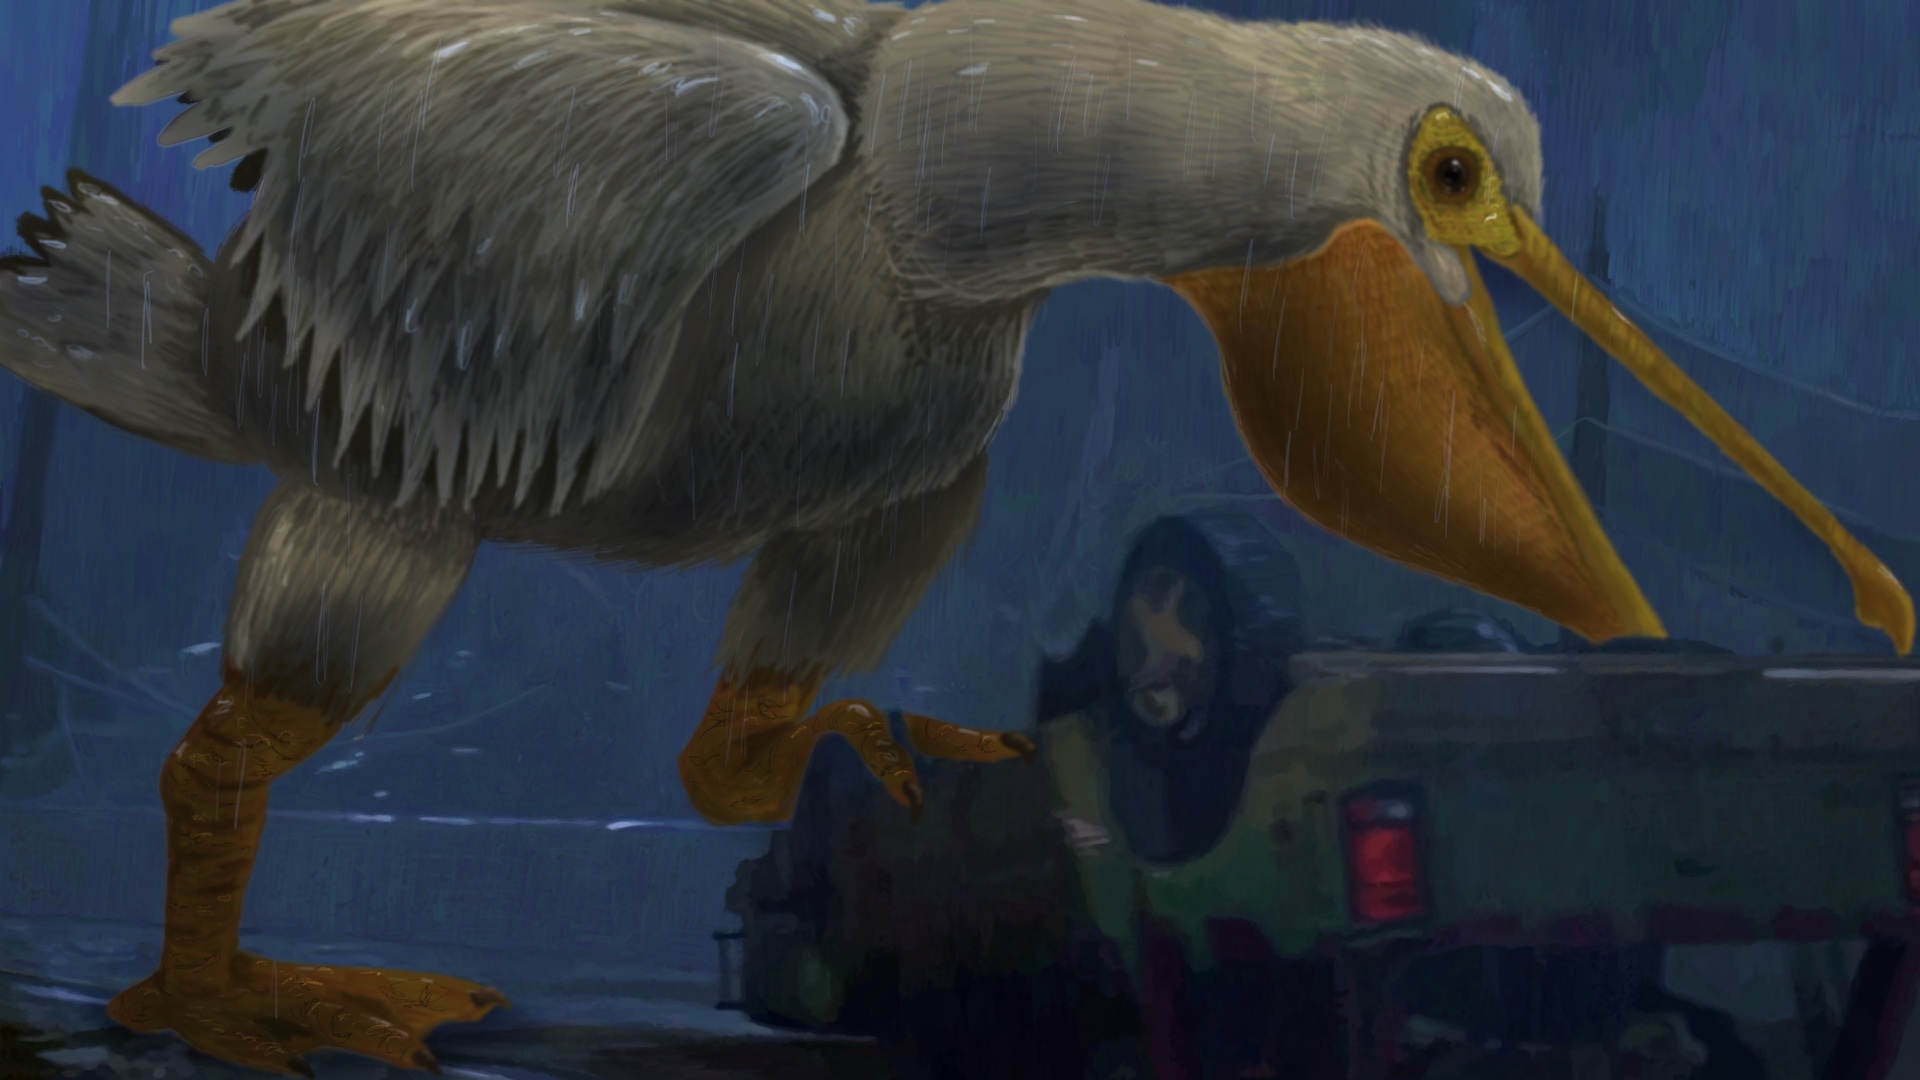 Digitally painted reproduction of of a frame from Jurassic Park, except instead of a T-Rex trying to eat the tour car, it's a giant pelican.'